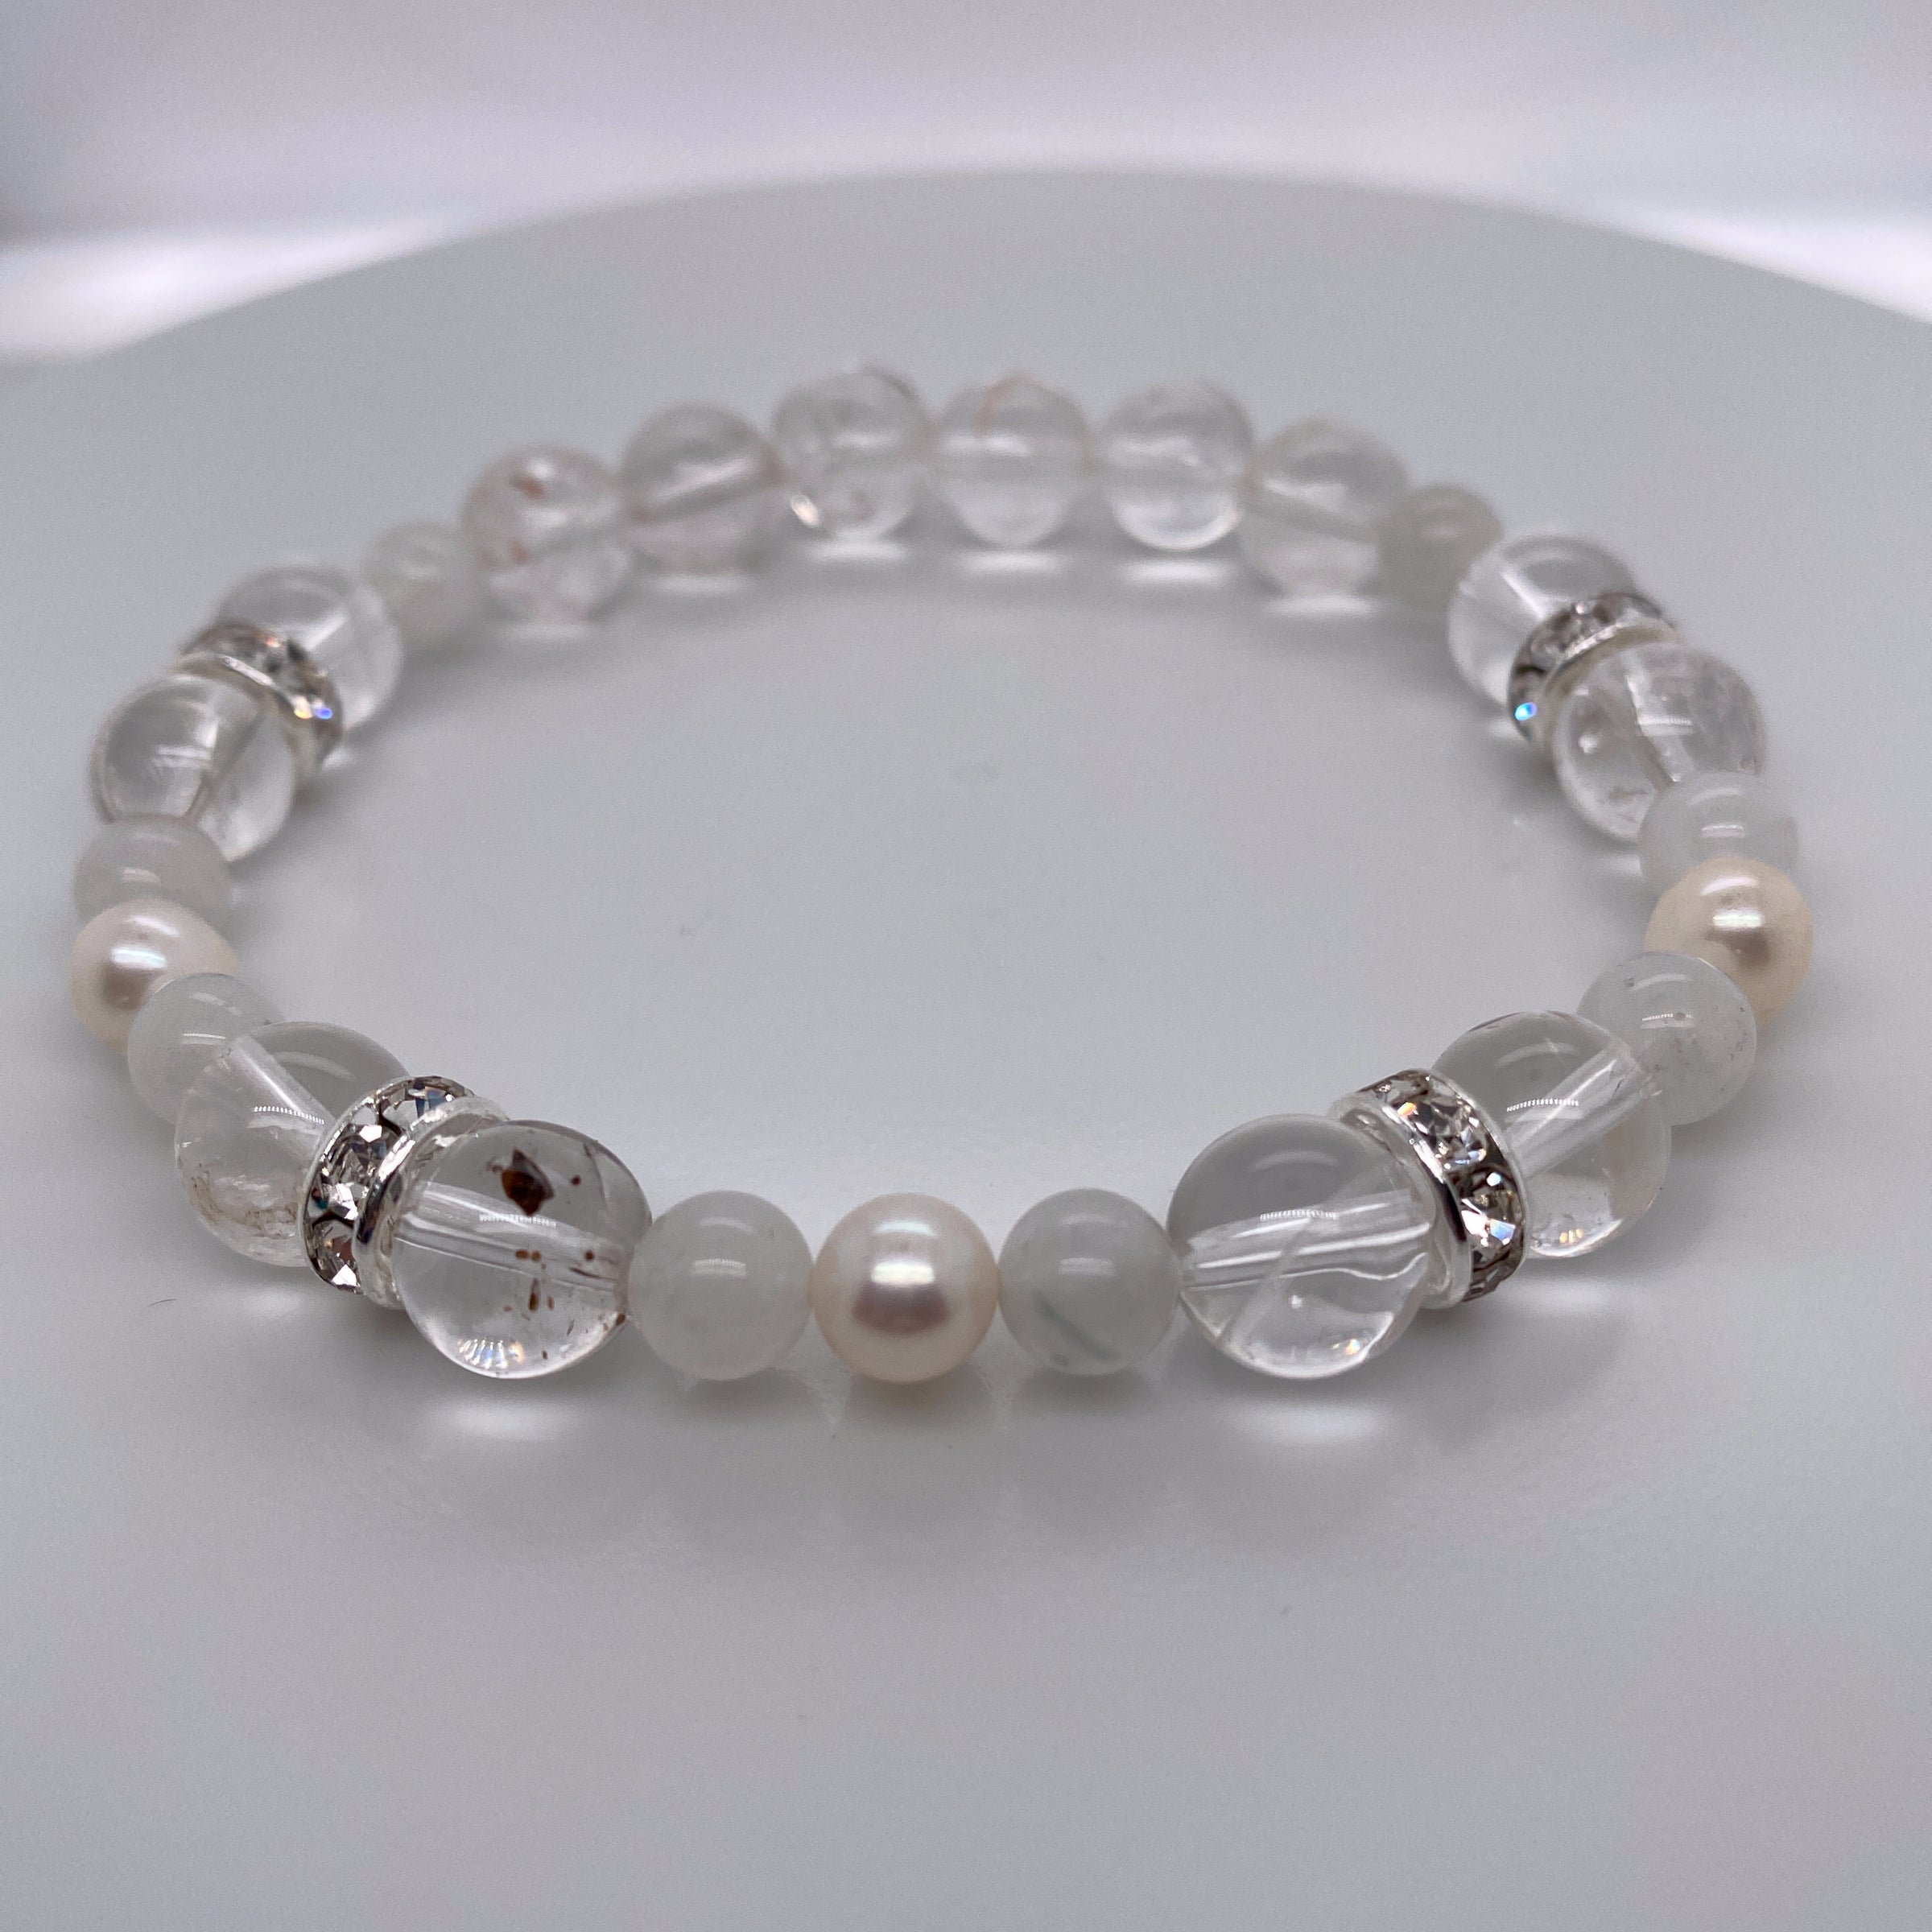 Clear Quartz Chip Healing Bracelet With Silver Toggle Clasp